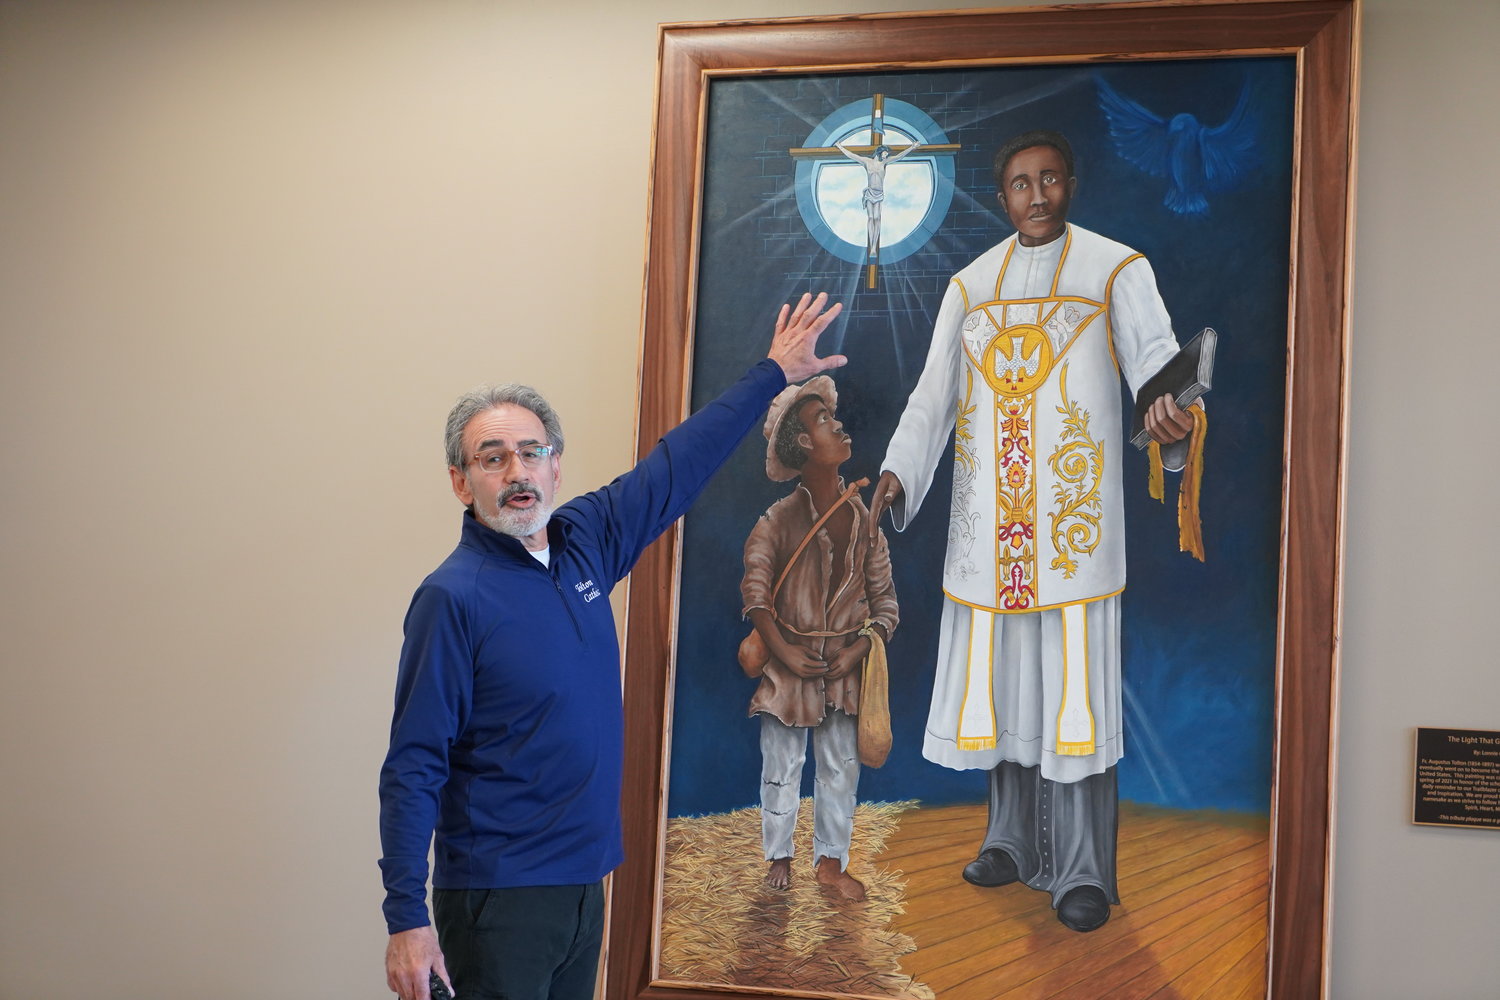 Lonnie Carlos Tapia, who teaches art, photography and design at Fr. Tolton Regional Catholic High School in Columbia, draws attention to symbols he incorporated into the new painting of Venerable Fr. Augustus Tolton commissioned for the school’s 10th anniversary, during a May 14 unveiling and dedication ceremony. The school’s Class of 2021 donated the plaque beside the painting, which hangs in a busy area next to the chapel of the school building.